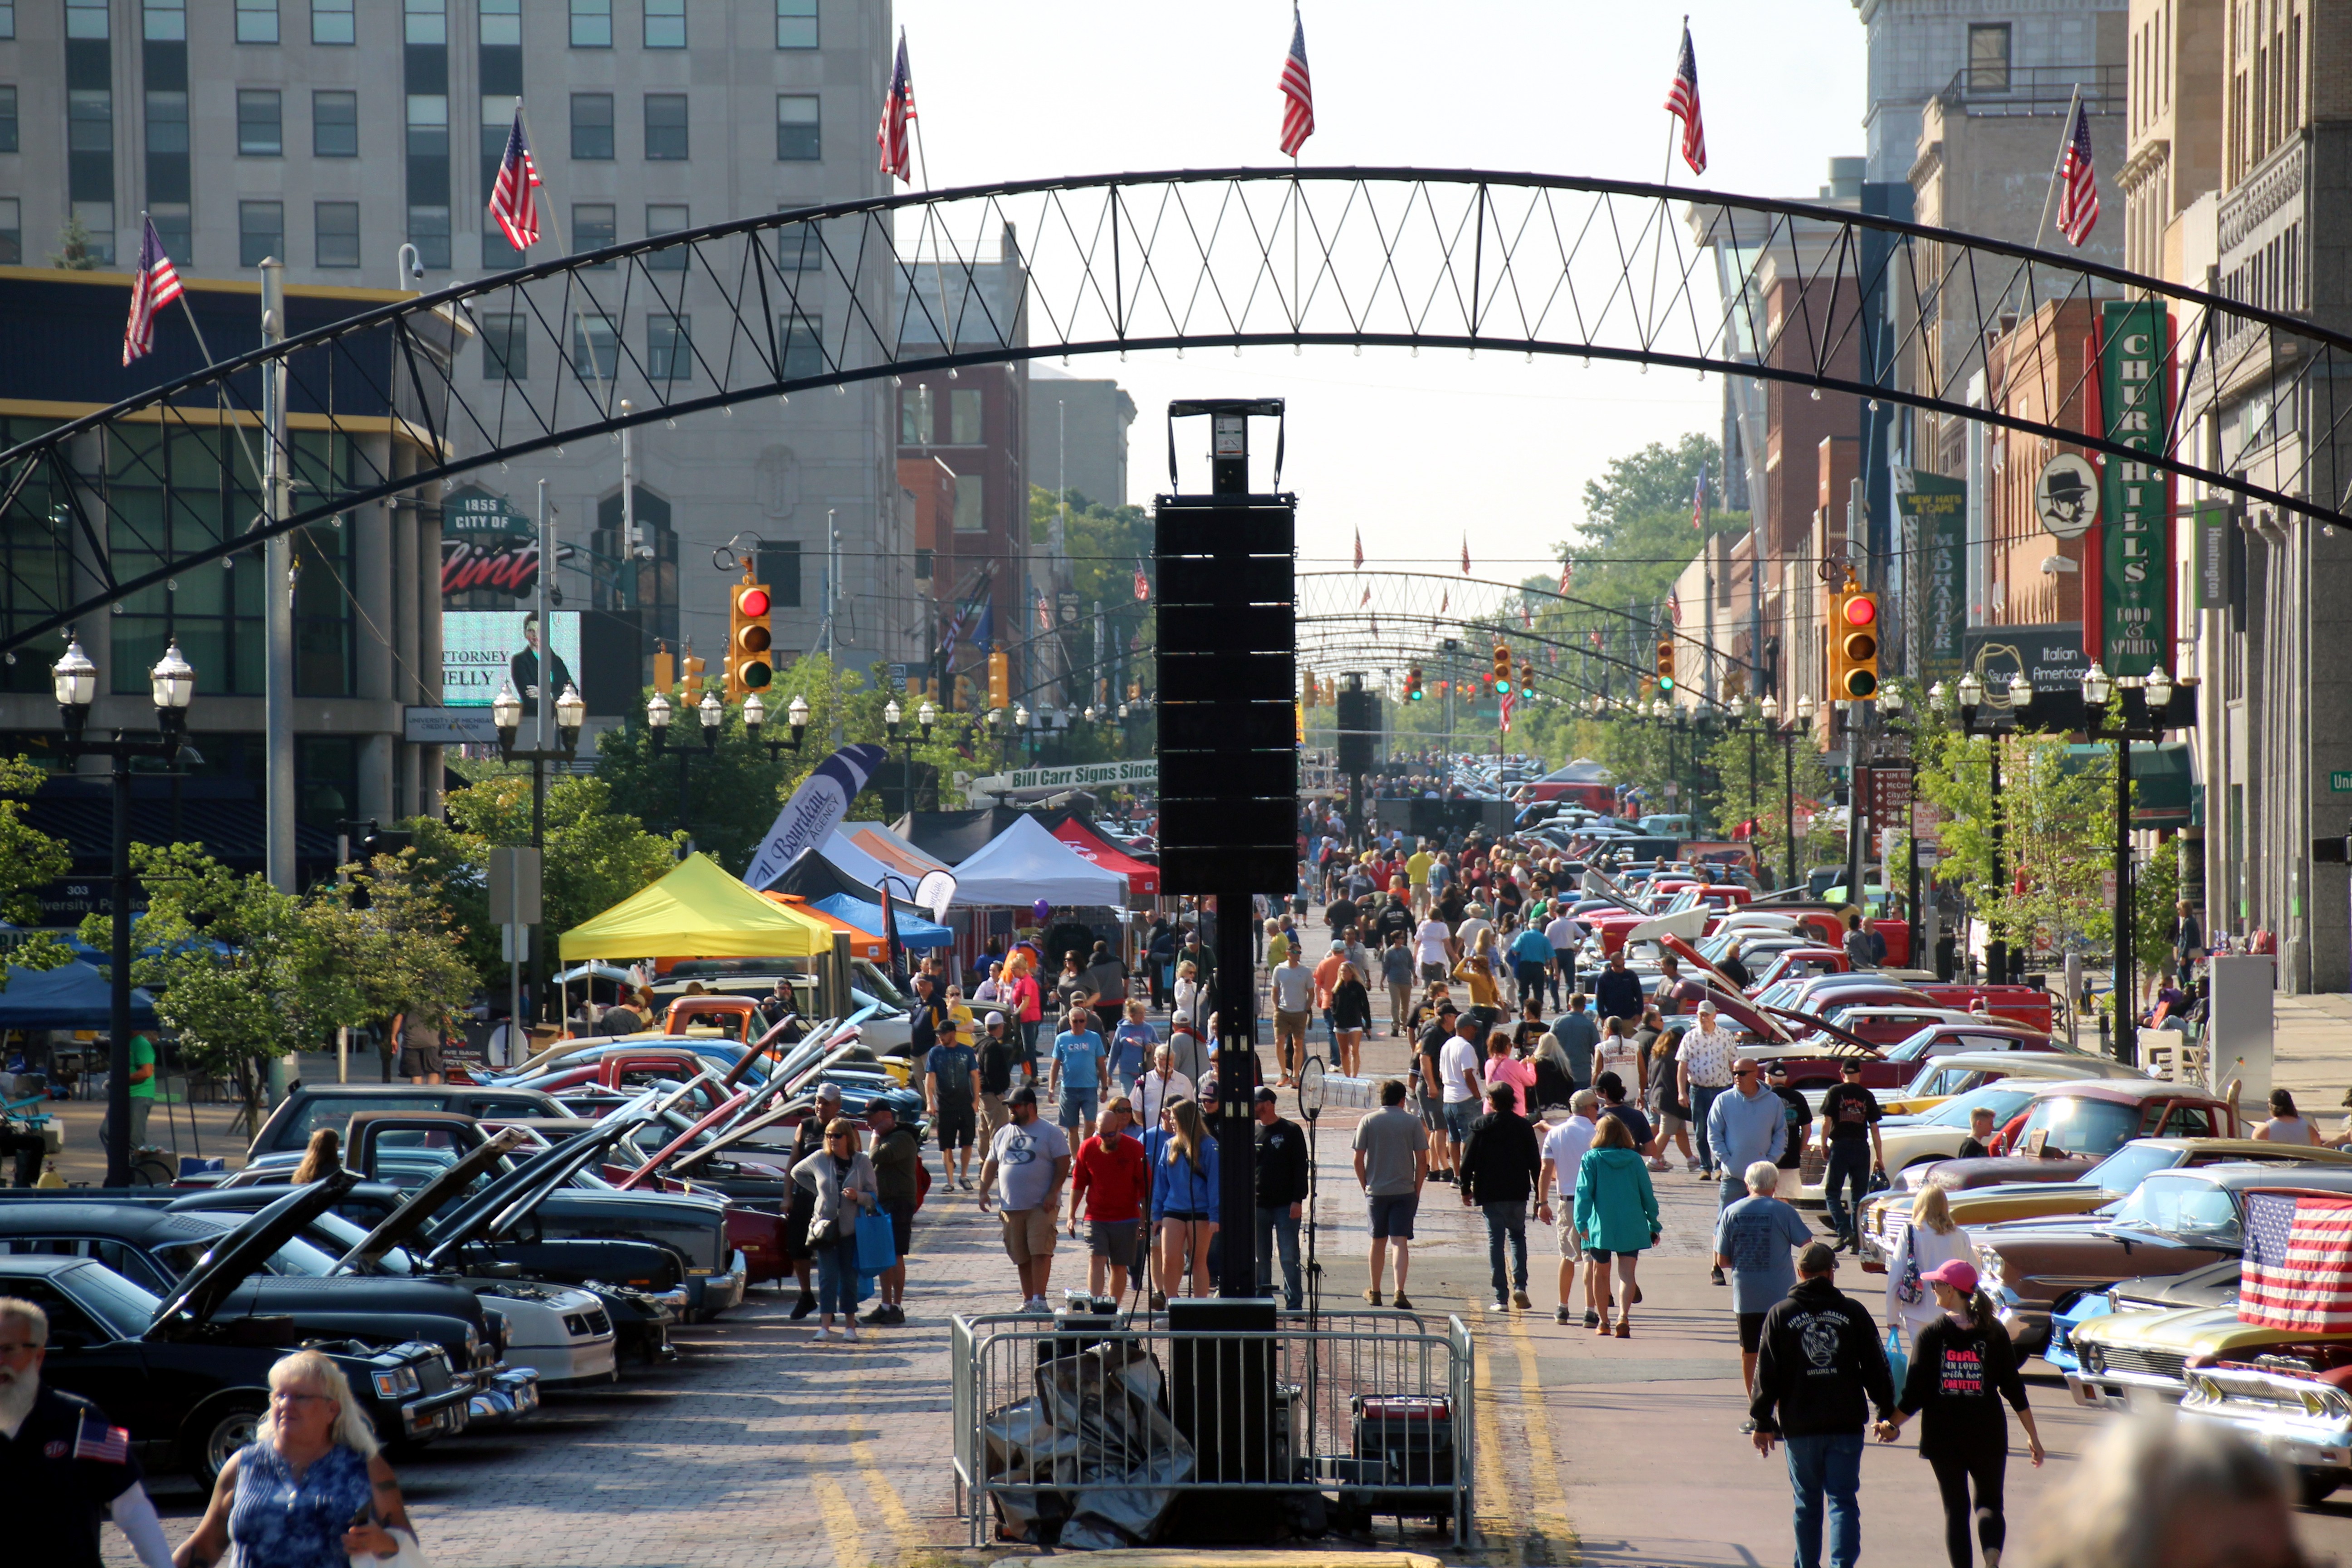 'Back to the Bricks' Again Proves a Worthy Alternative to the Woodward Dream Cruise